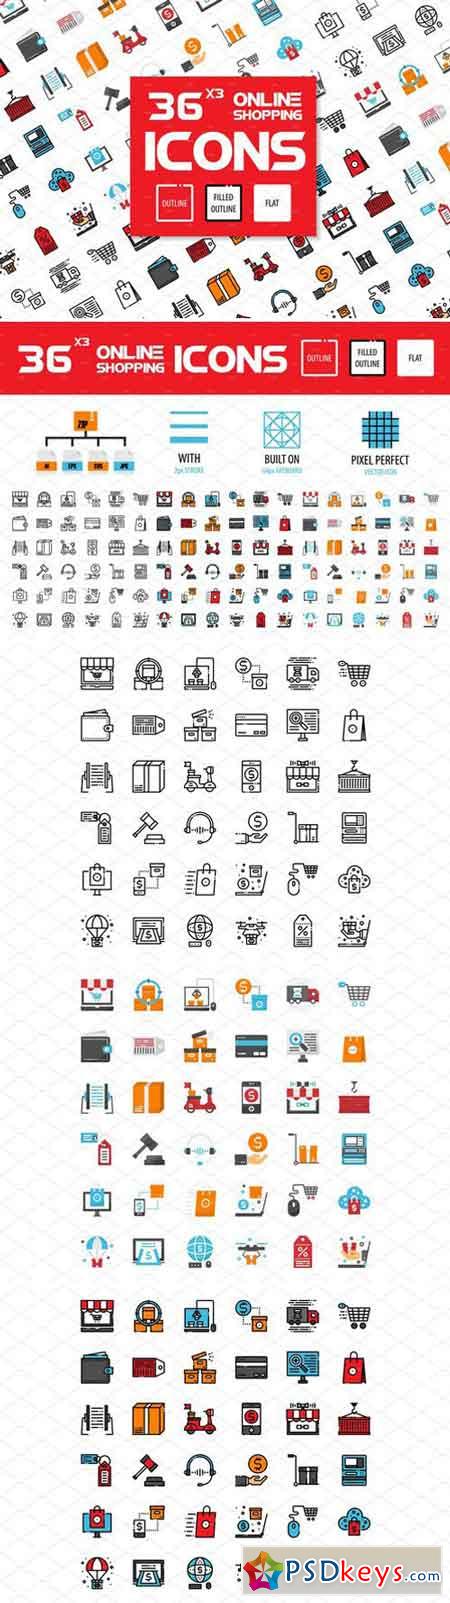 36x3 Online Shopping icons 2359988